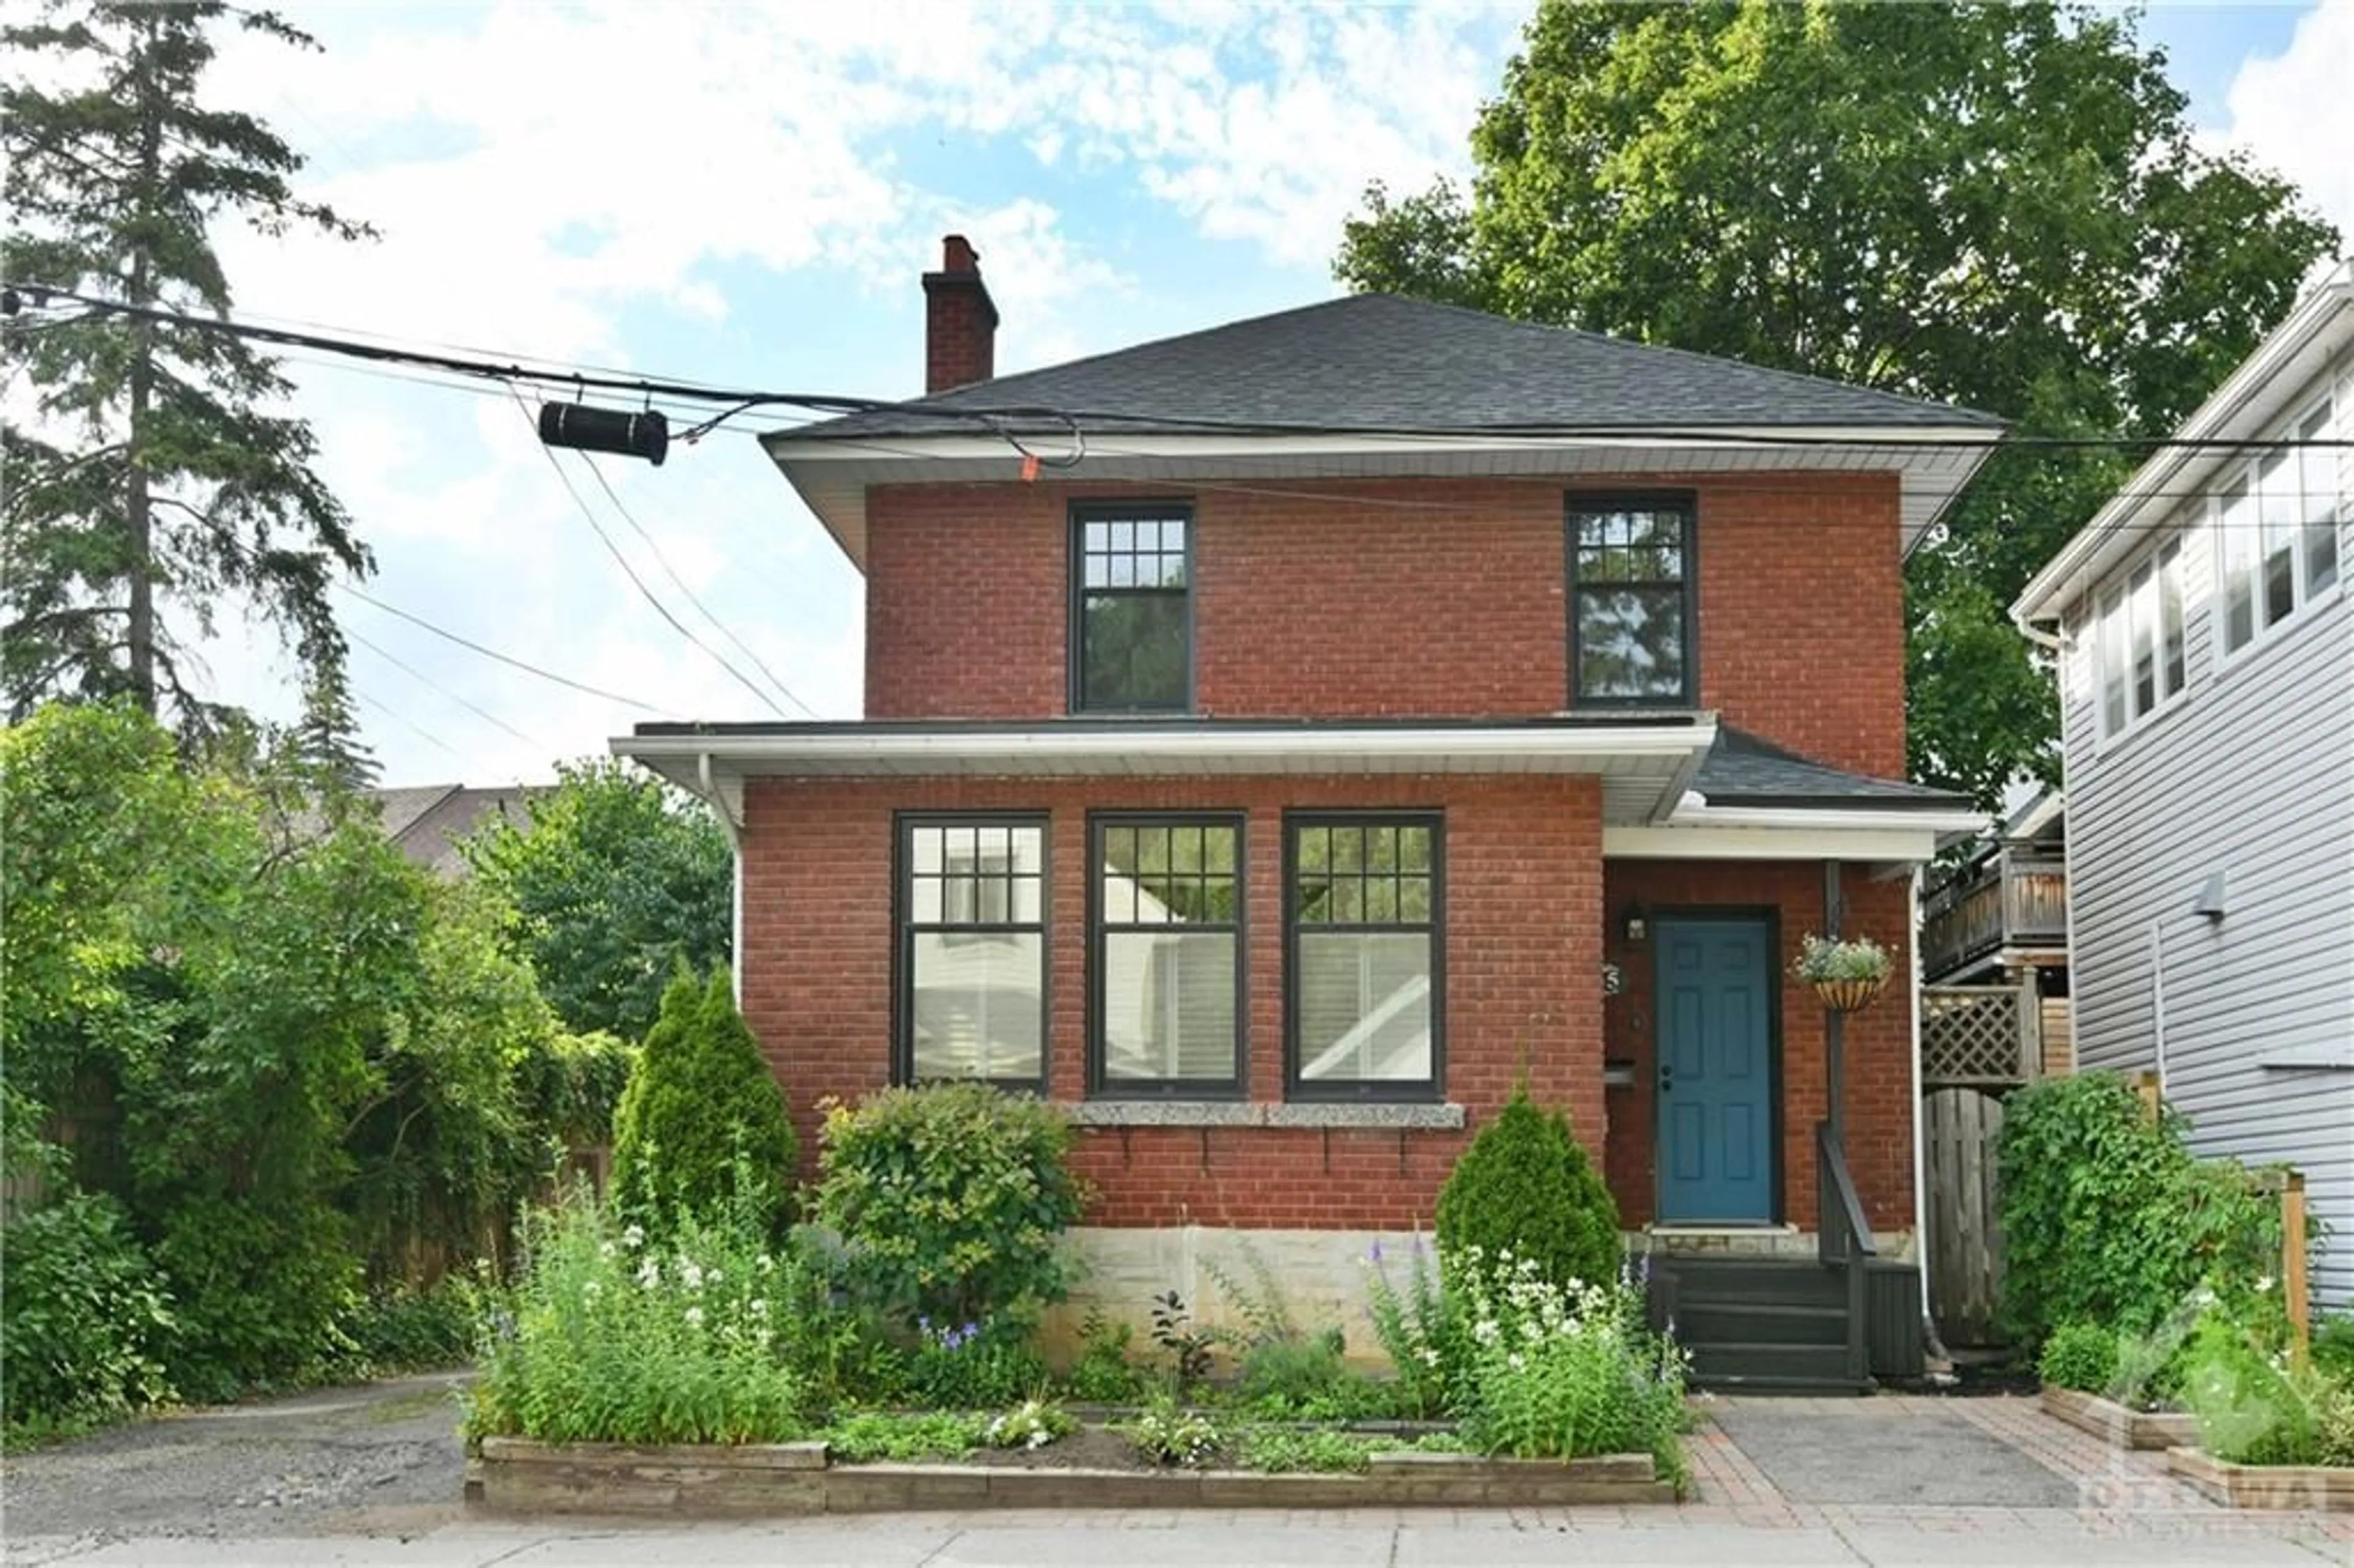 Home with brick exterior material for 15 CHESLEY St, Ottawa Ontario K1S 3C1